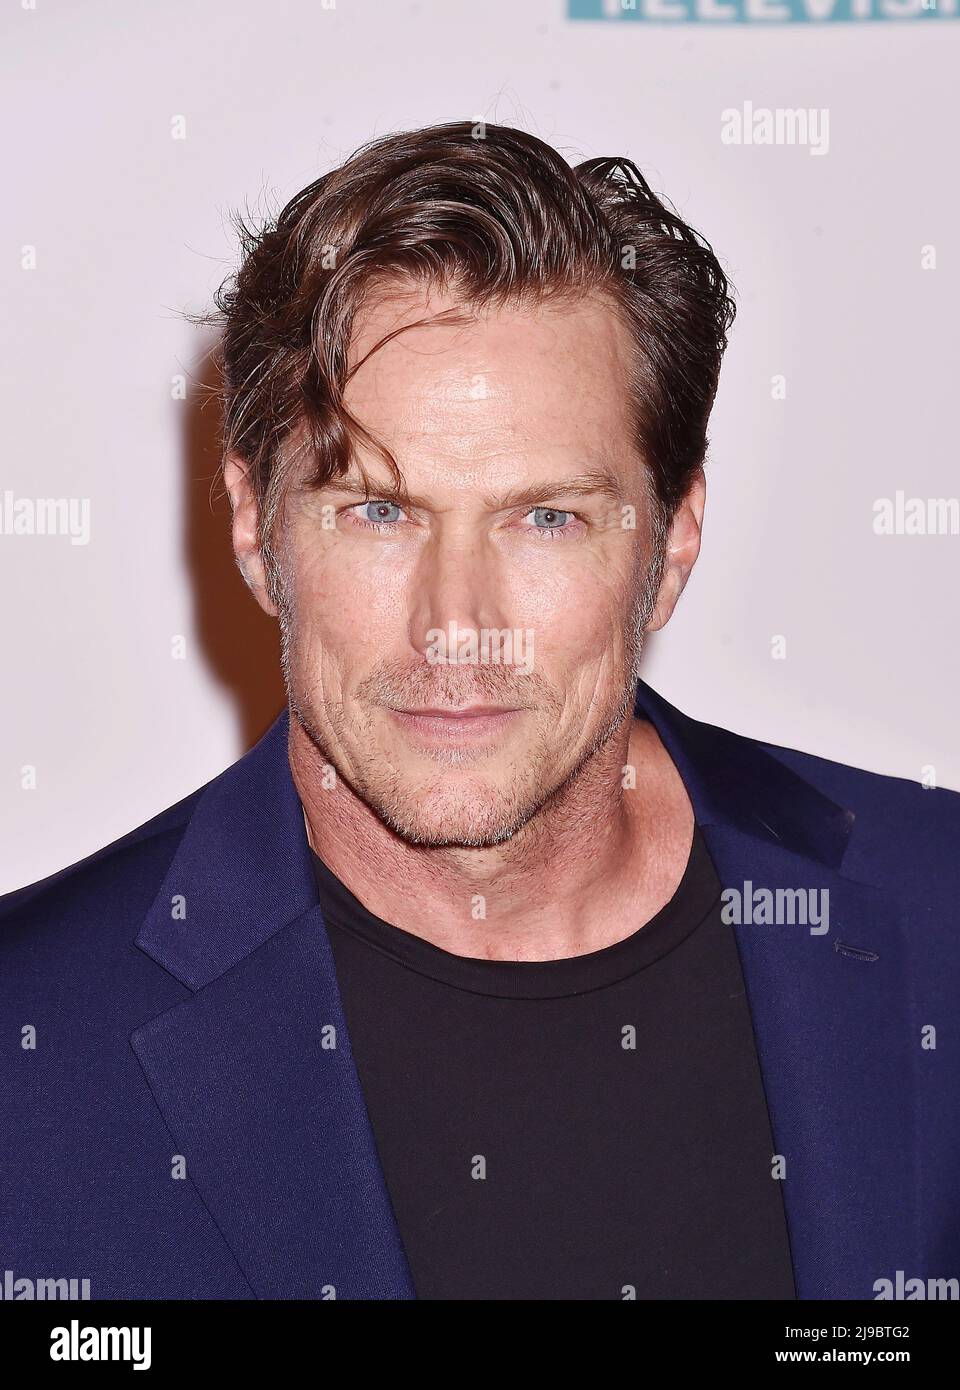 Los Angeles, Ca. 20th May, 2022. Jason Lewis attends the 29th Annual Race To Erase MS Gala at the Fairmont Century Plaza Hotel on May 20, 2022 in Los Angeles, California. Credit: Jeffrey Mayer/Jtm Photos/Media Punch/Alamy Live News Stock Photo